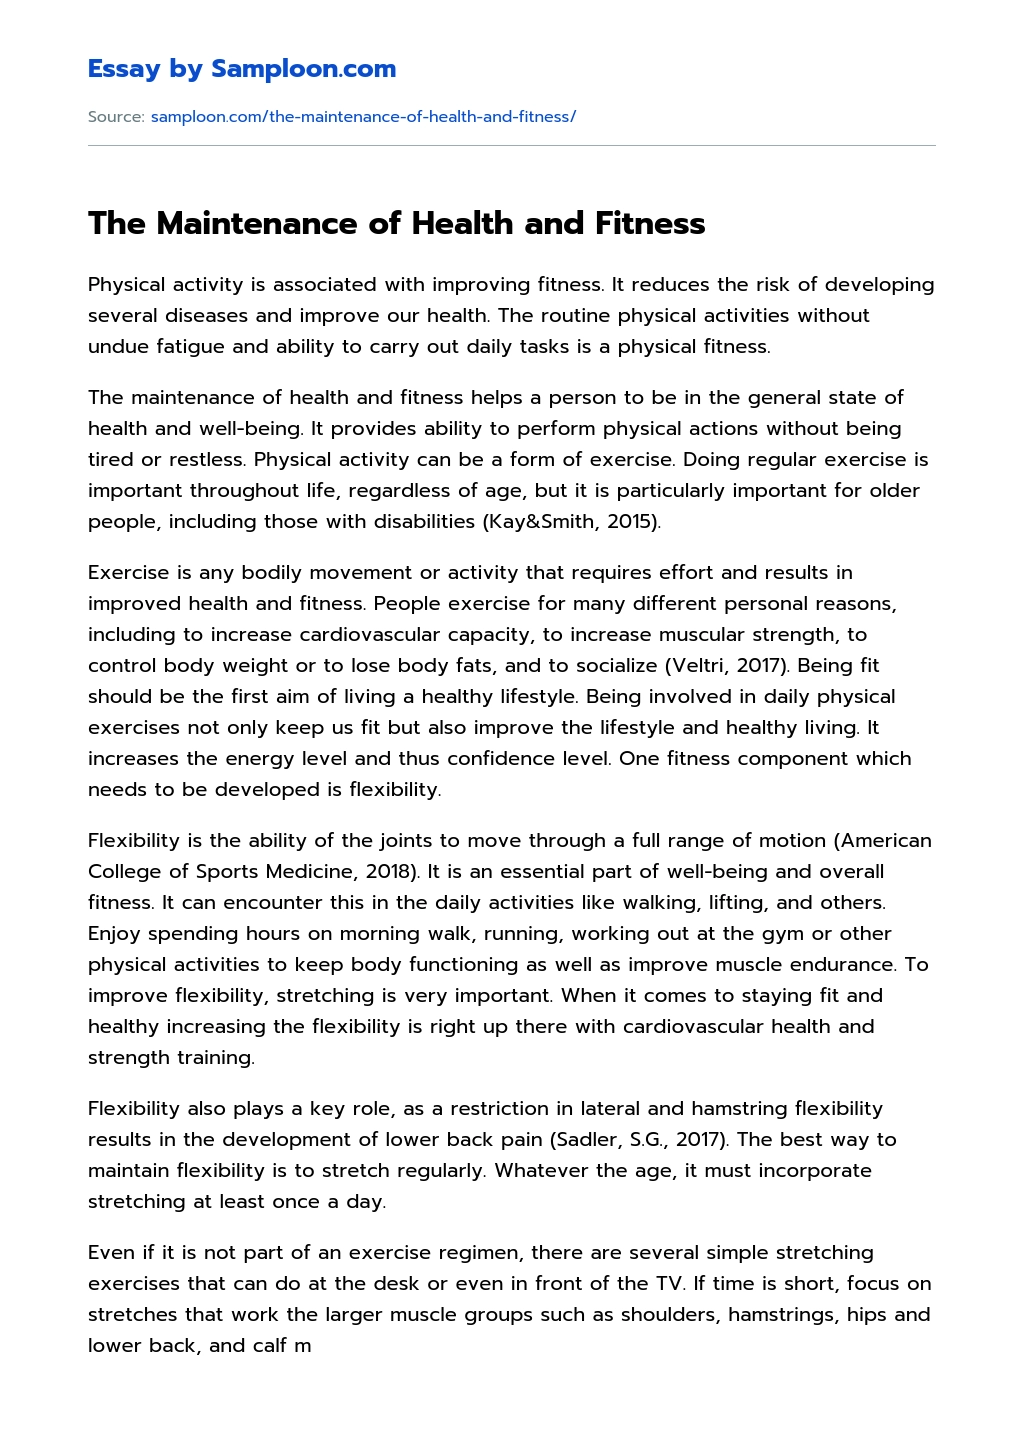 The Maintenance of Health and Fitness essay